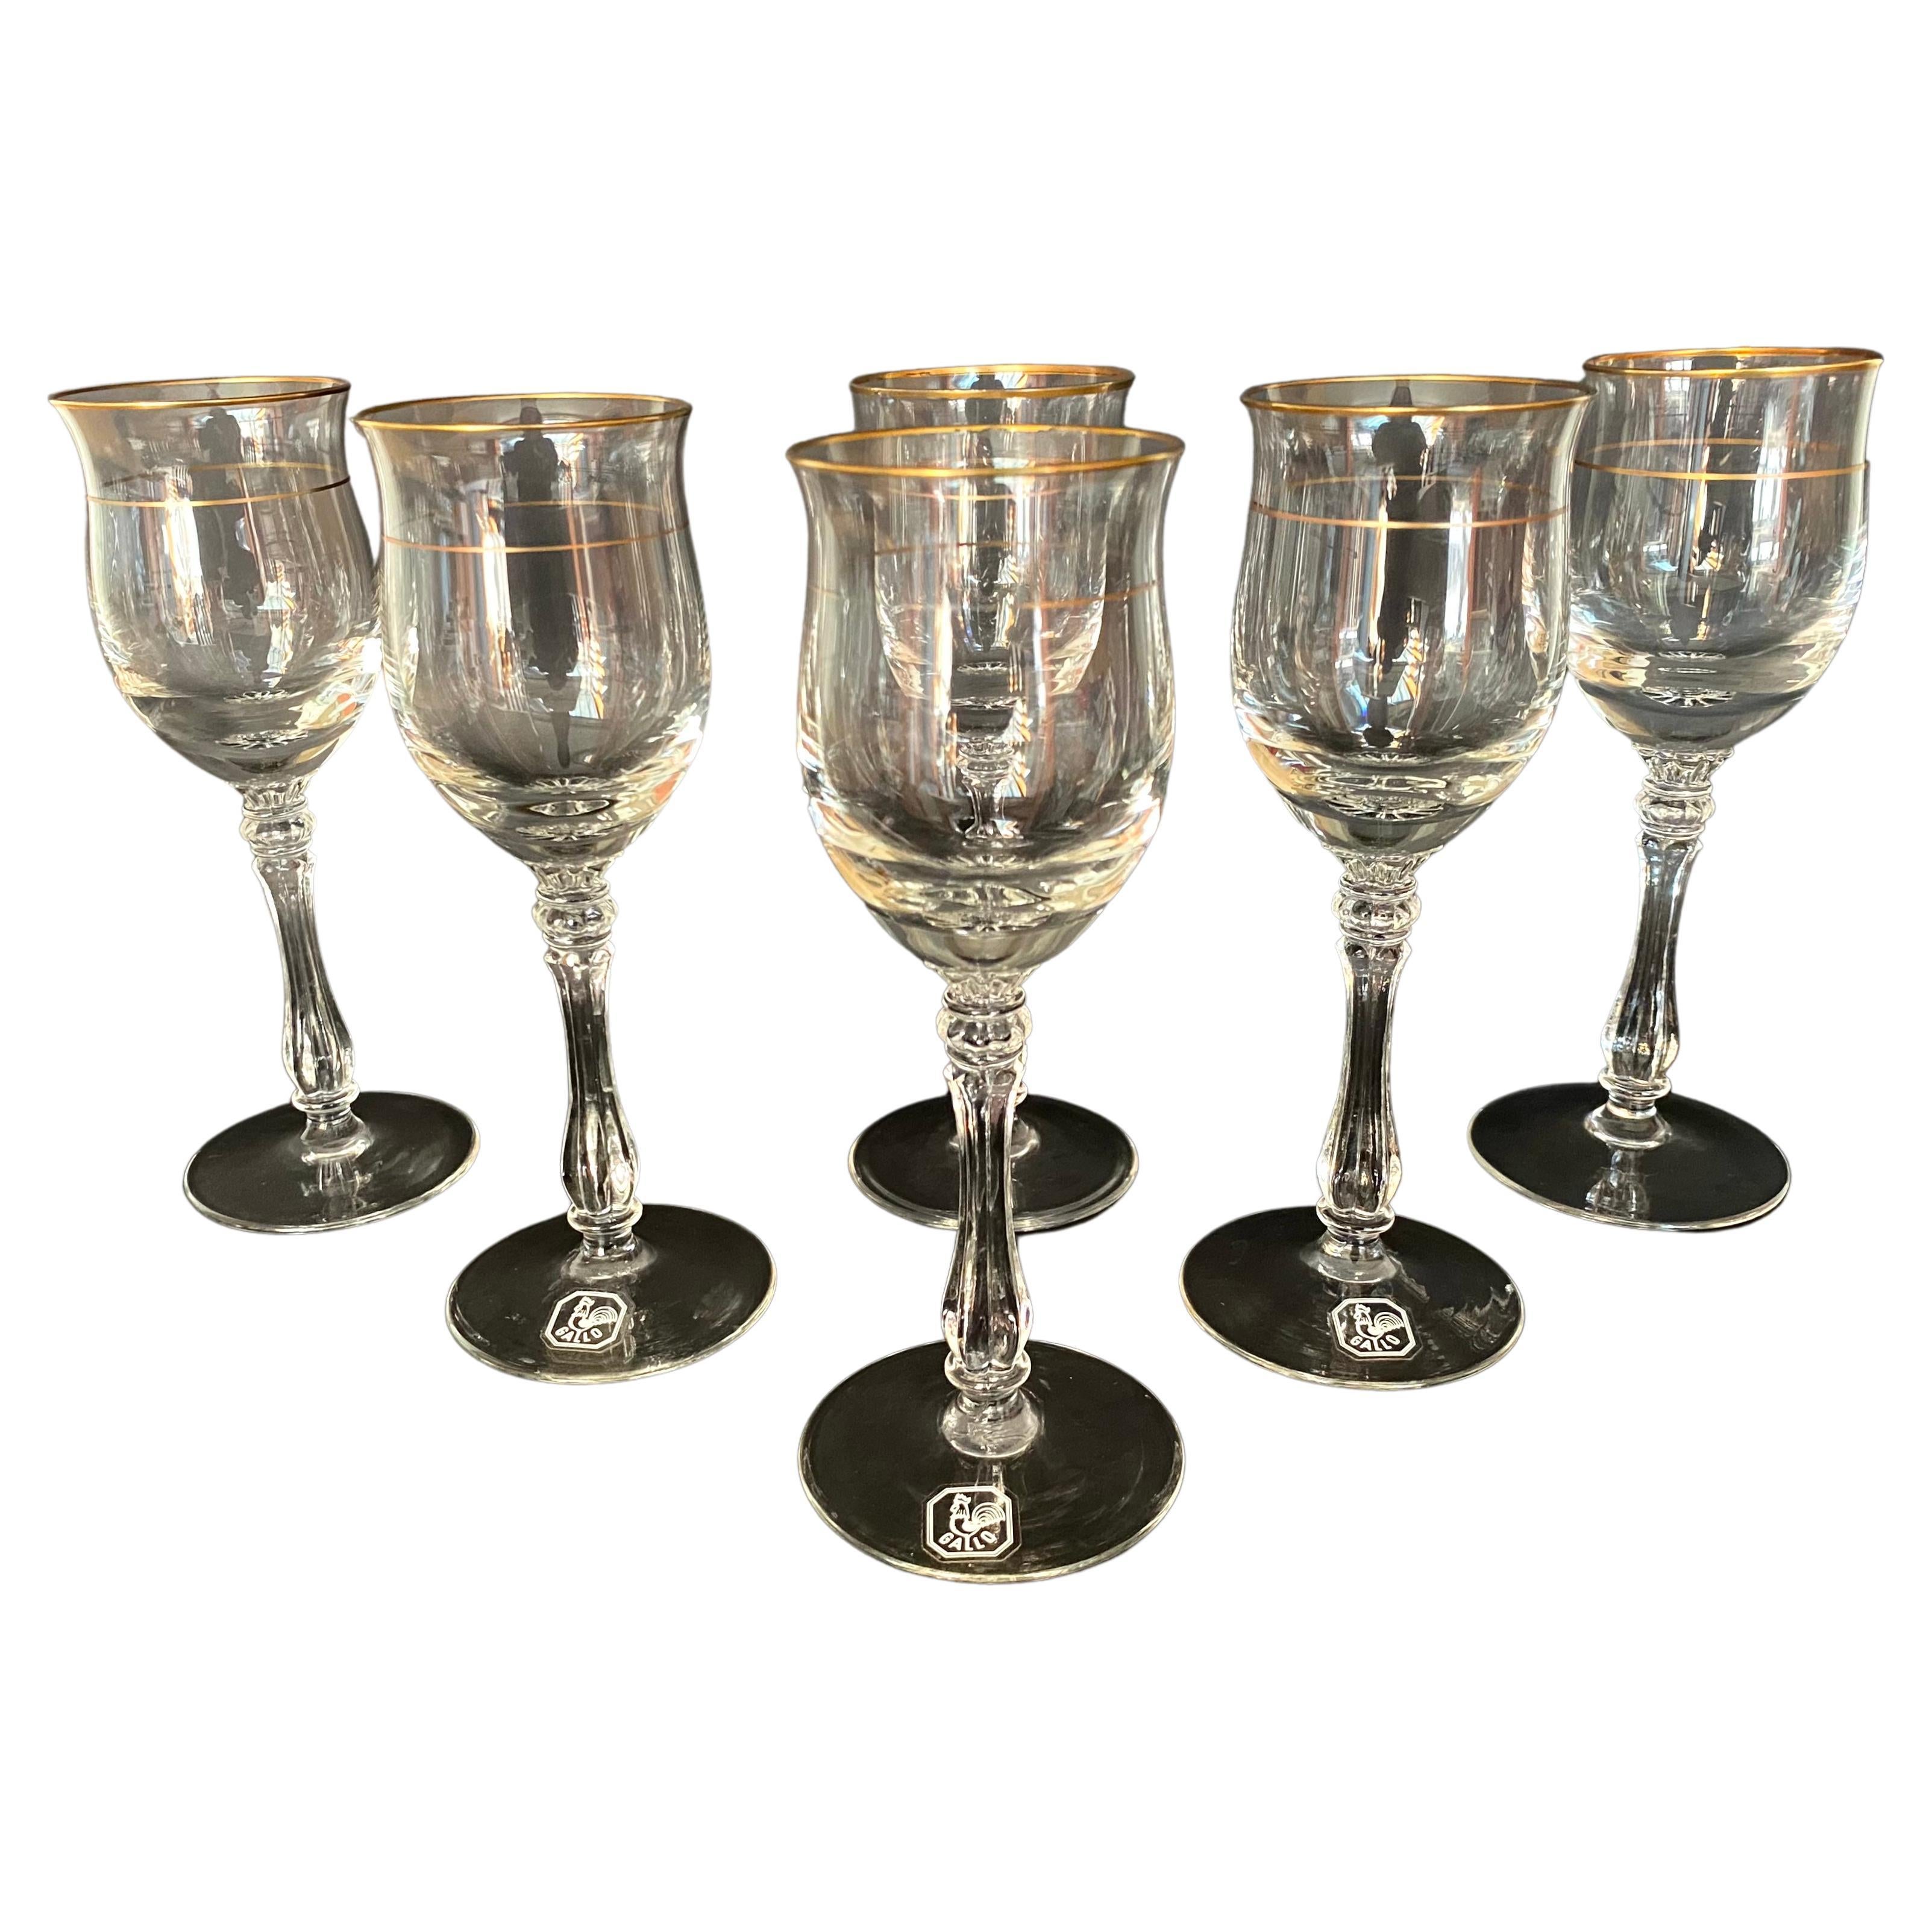 Charming Vintage Set of 6 Crystal Cognac Glasses by Gallo, Germany, 1970s For Sale